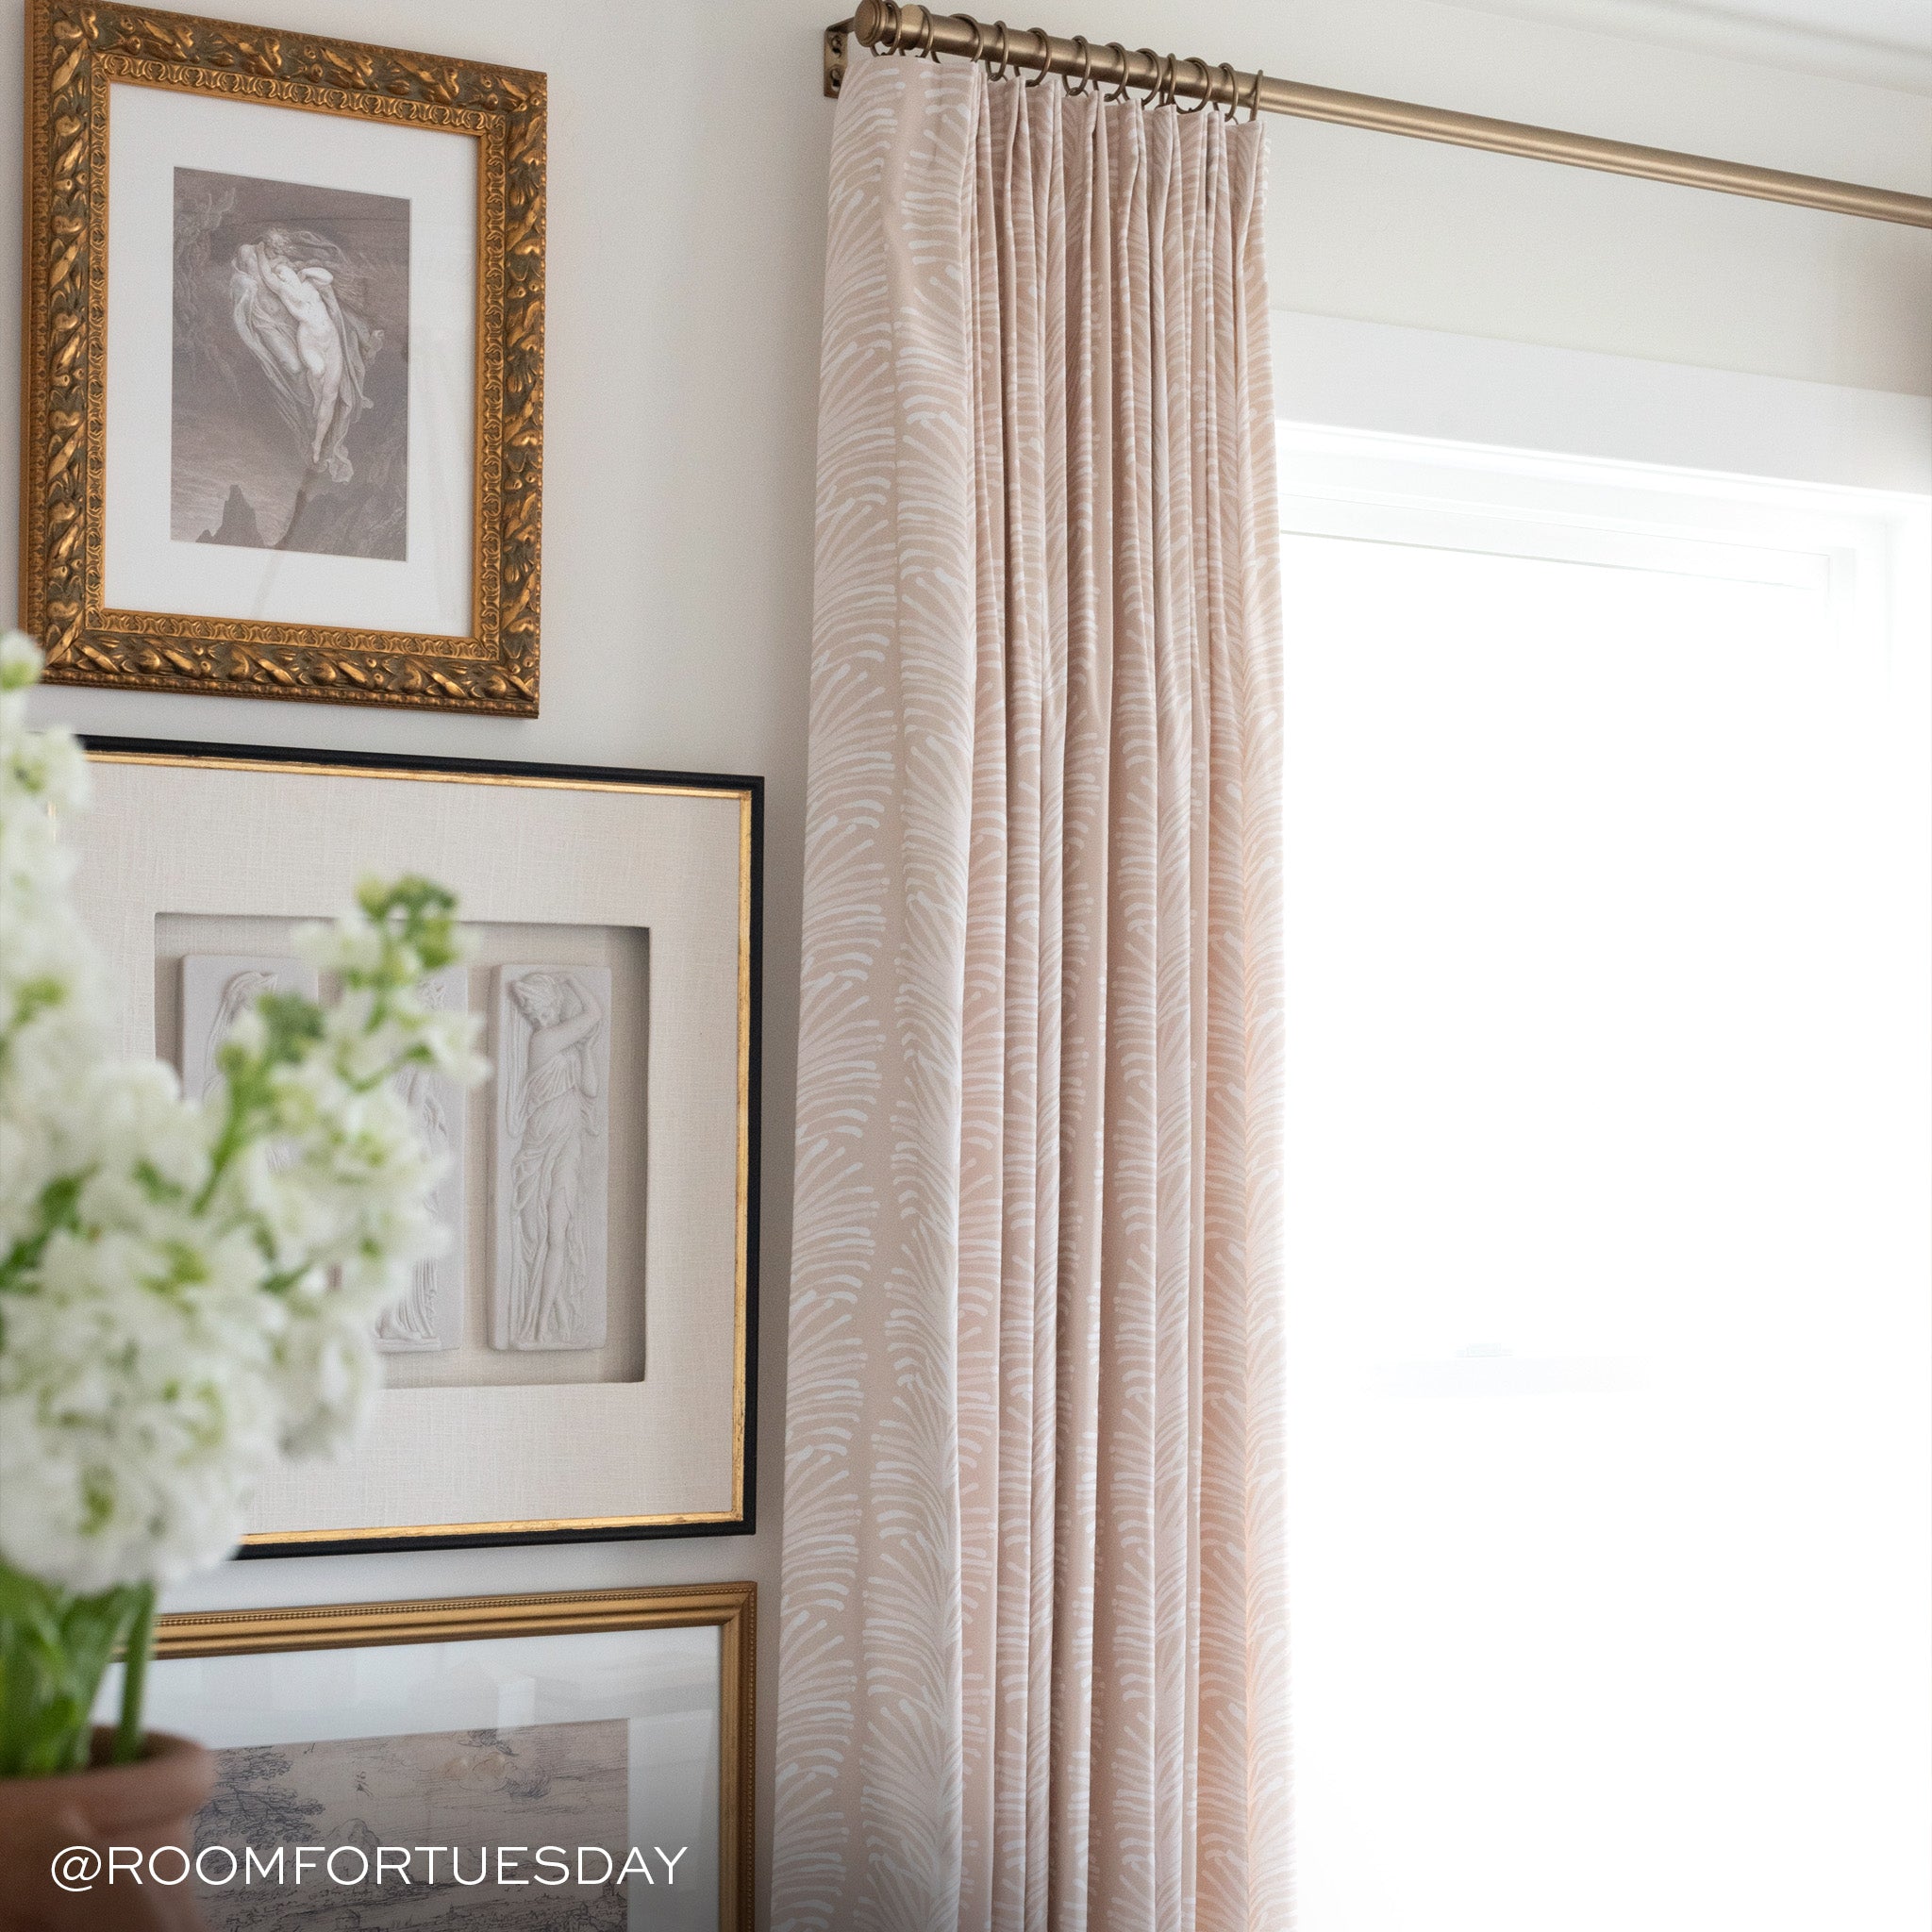 beige botanical stripe pattern curtains hung on a metal rod in front of an illuminated window